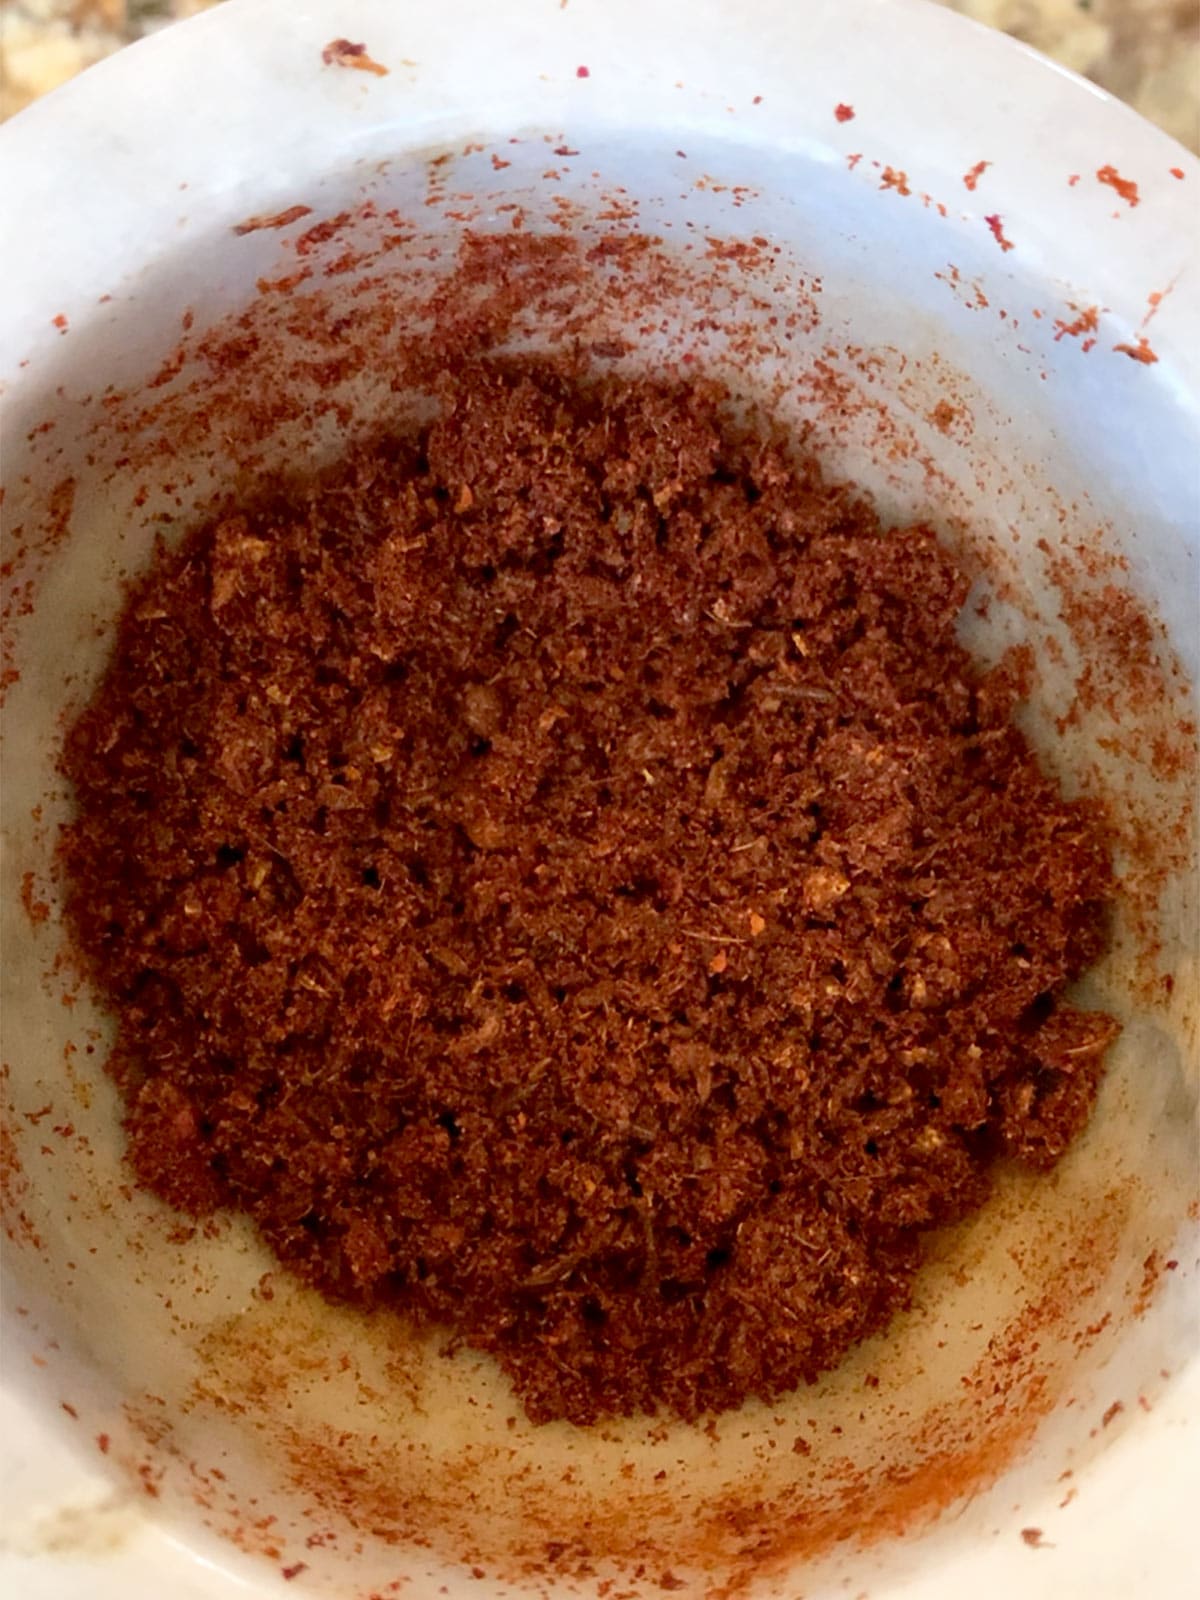 Dried spices for rose harissa combined with rose petals and smoked paprika.